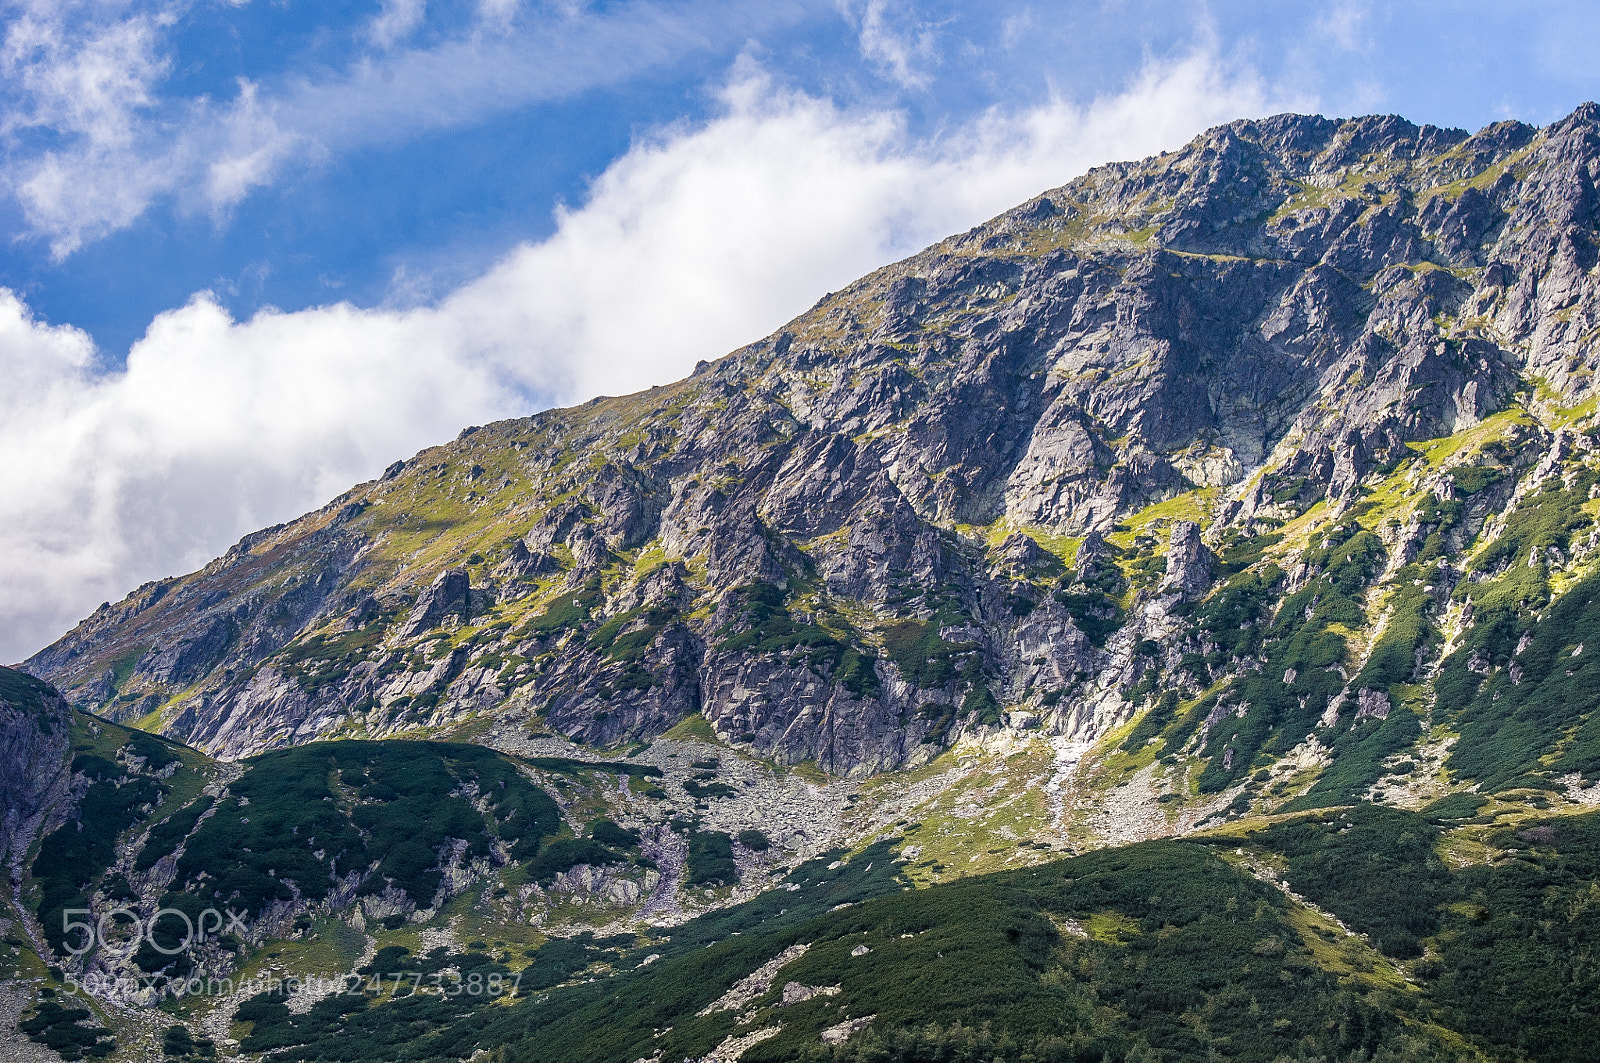 Pentax K-x sample photo. View in tatras mountains. photography